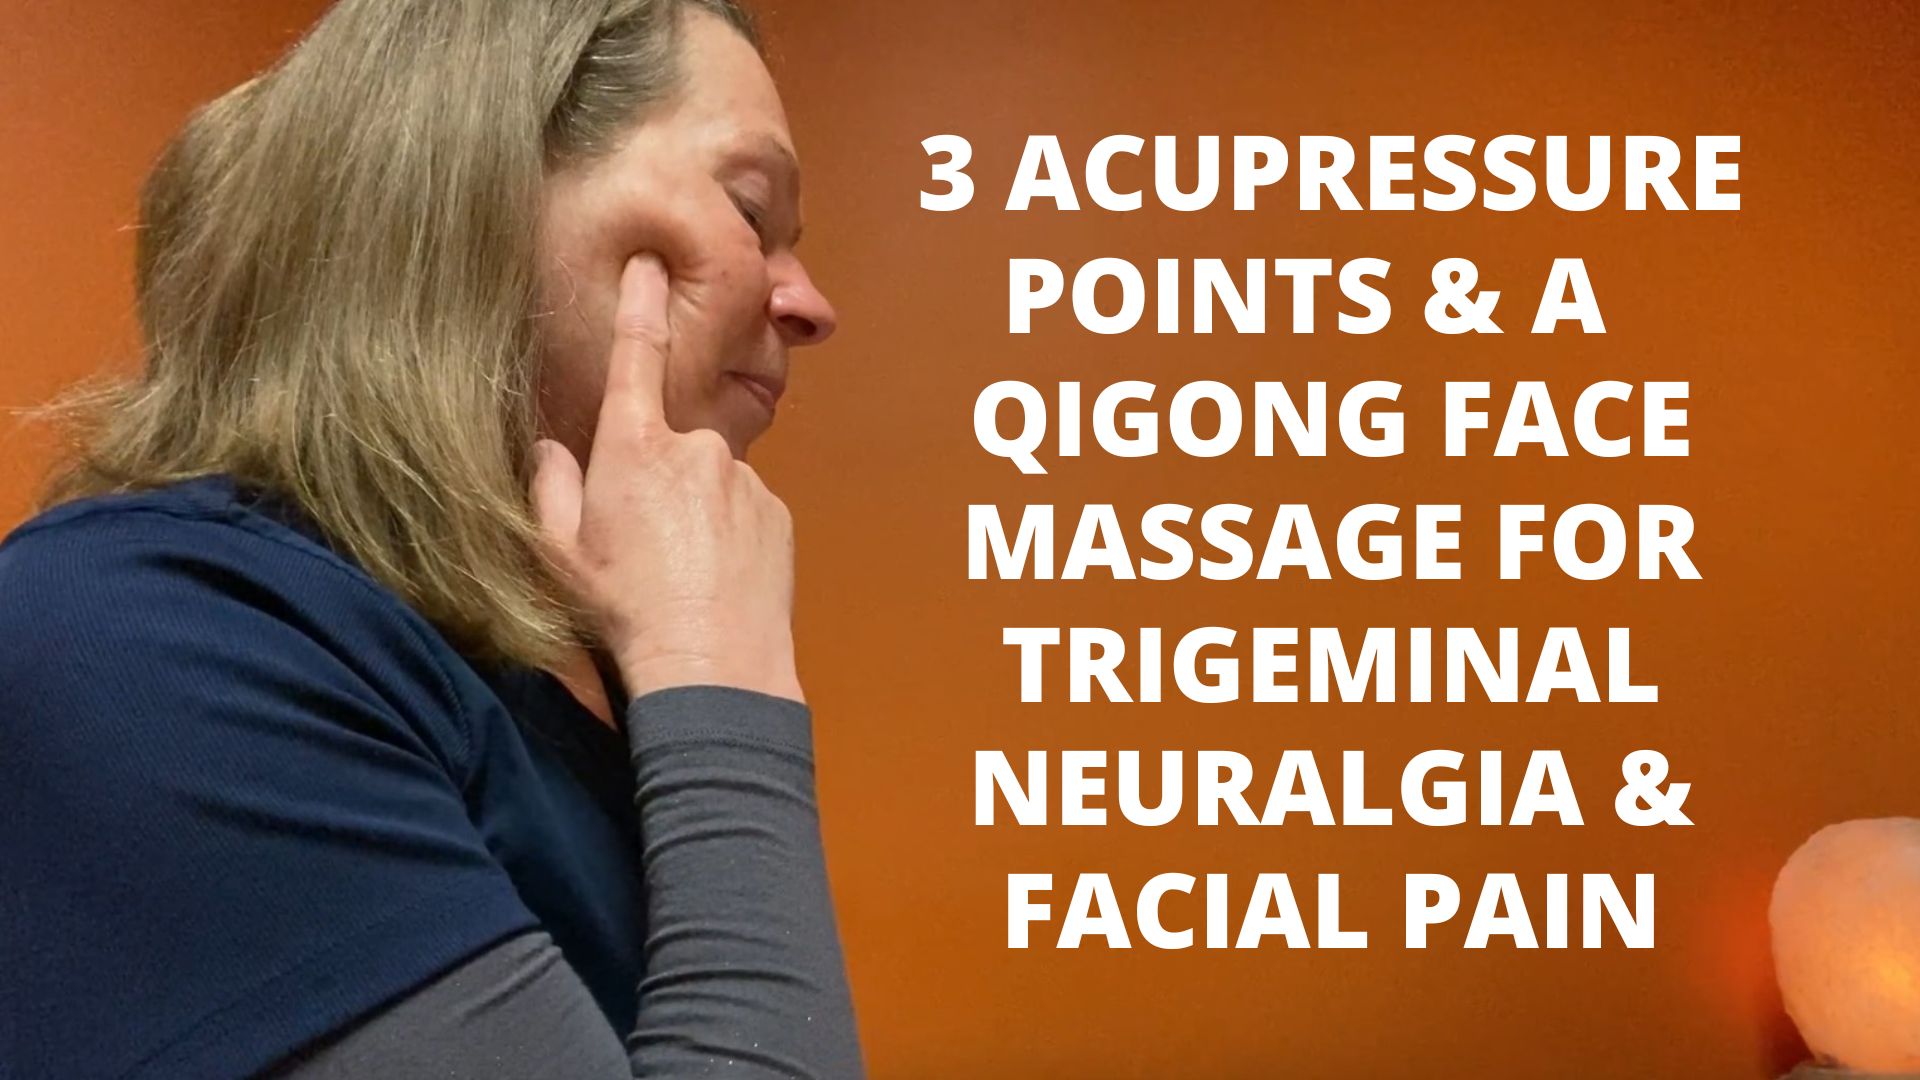 3 Acupressure Points & A Qigong Face Massage For Trigeminal Neuralgia